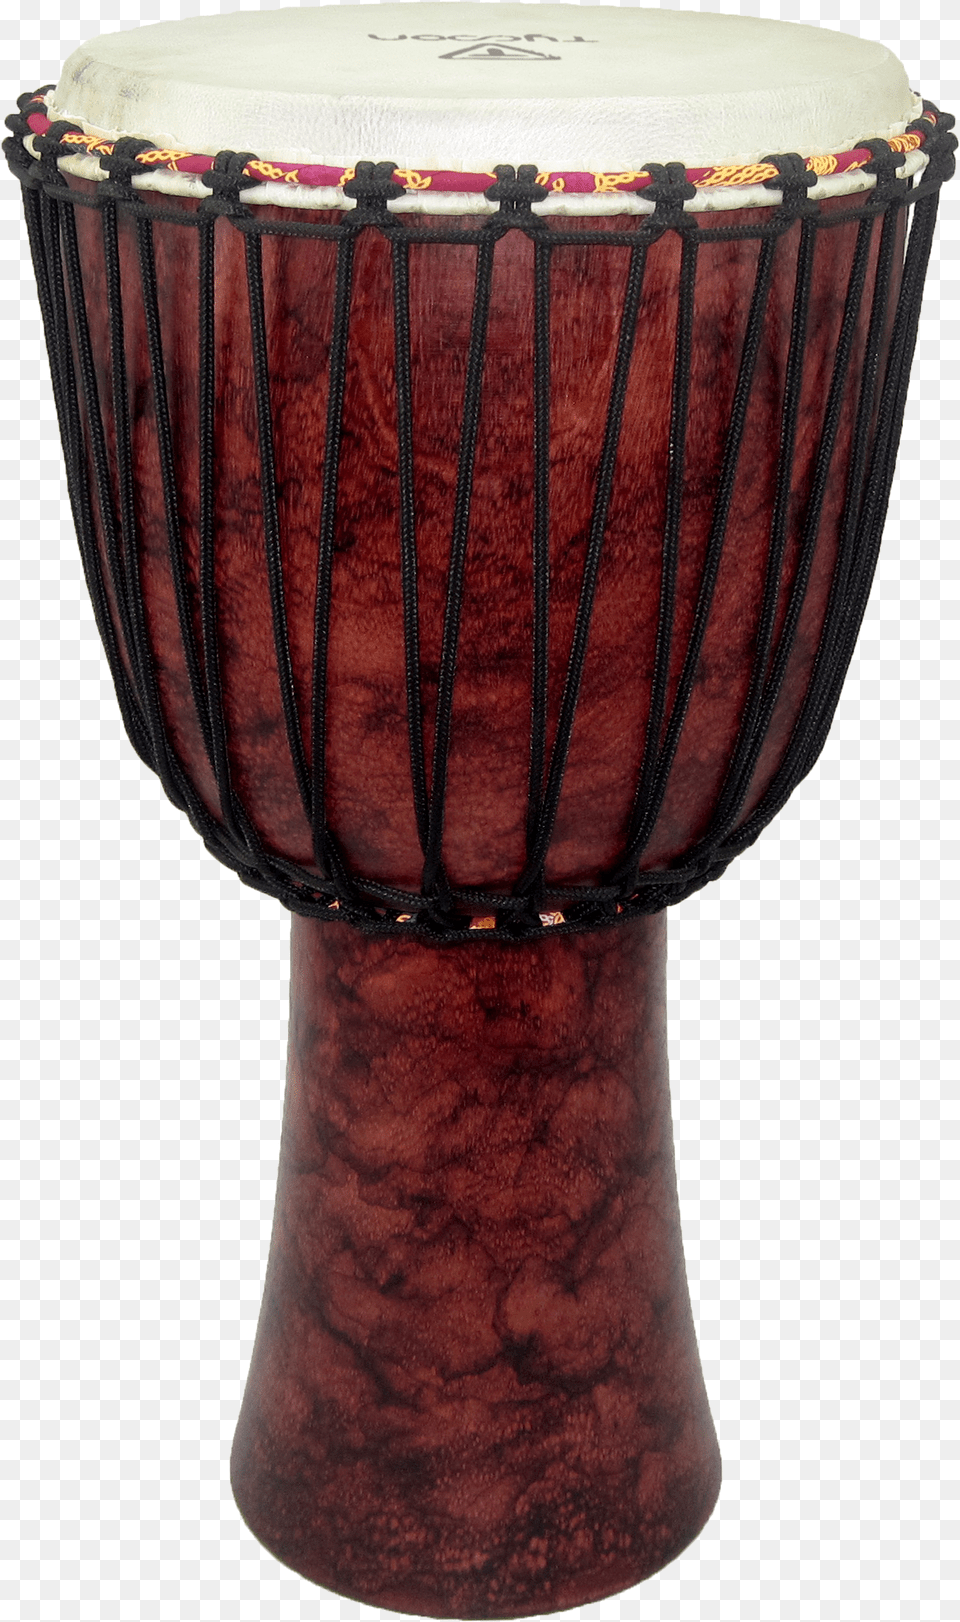 Tycoon Djembe, Drum, Musical Instrument, Percussion, Kettledrum Free Transparent Png